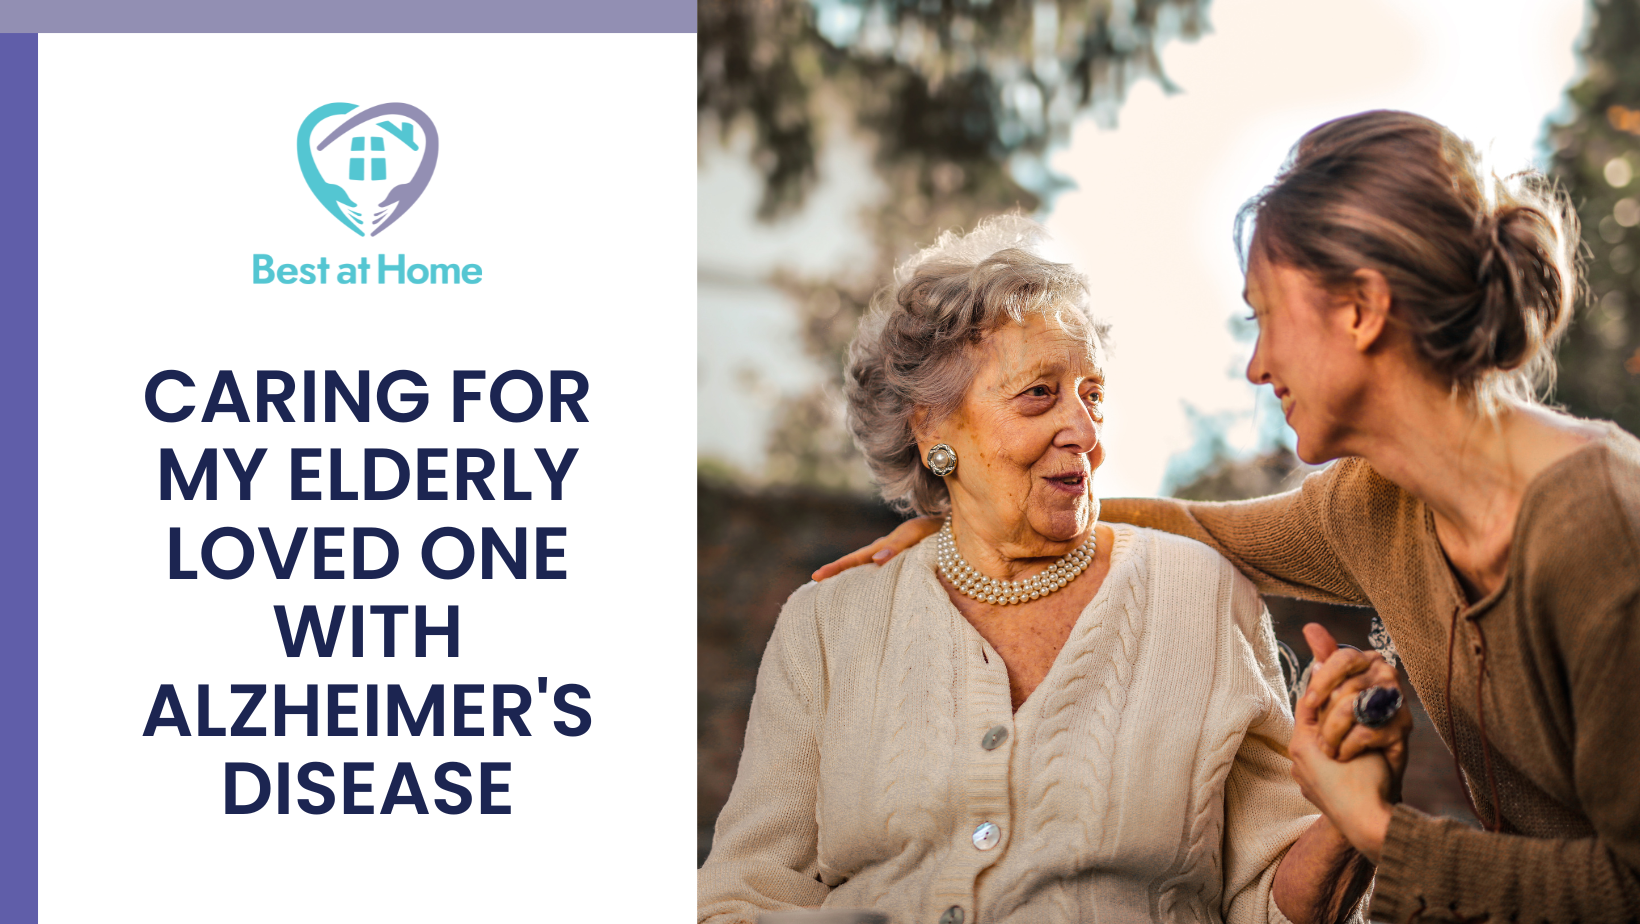 Caring for my elderly loved one with Alzheimer's disease